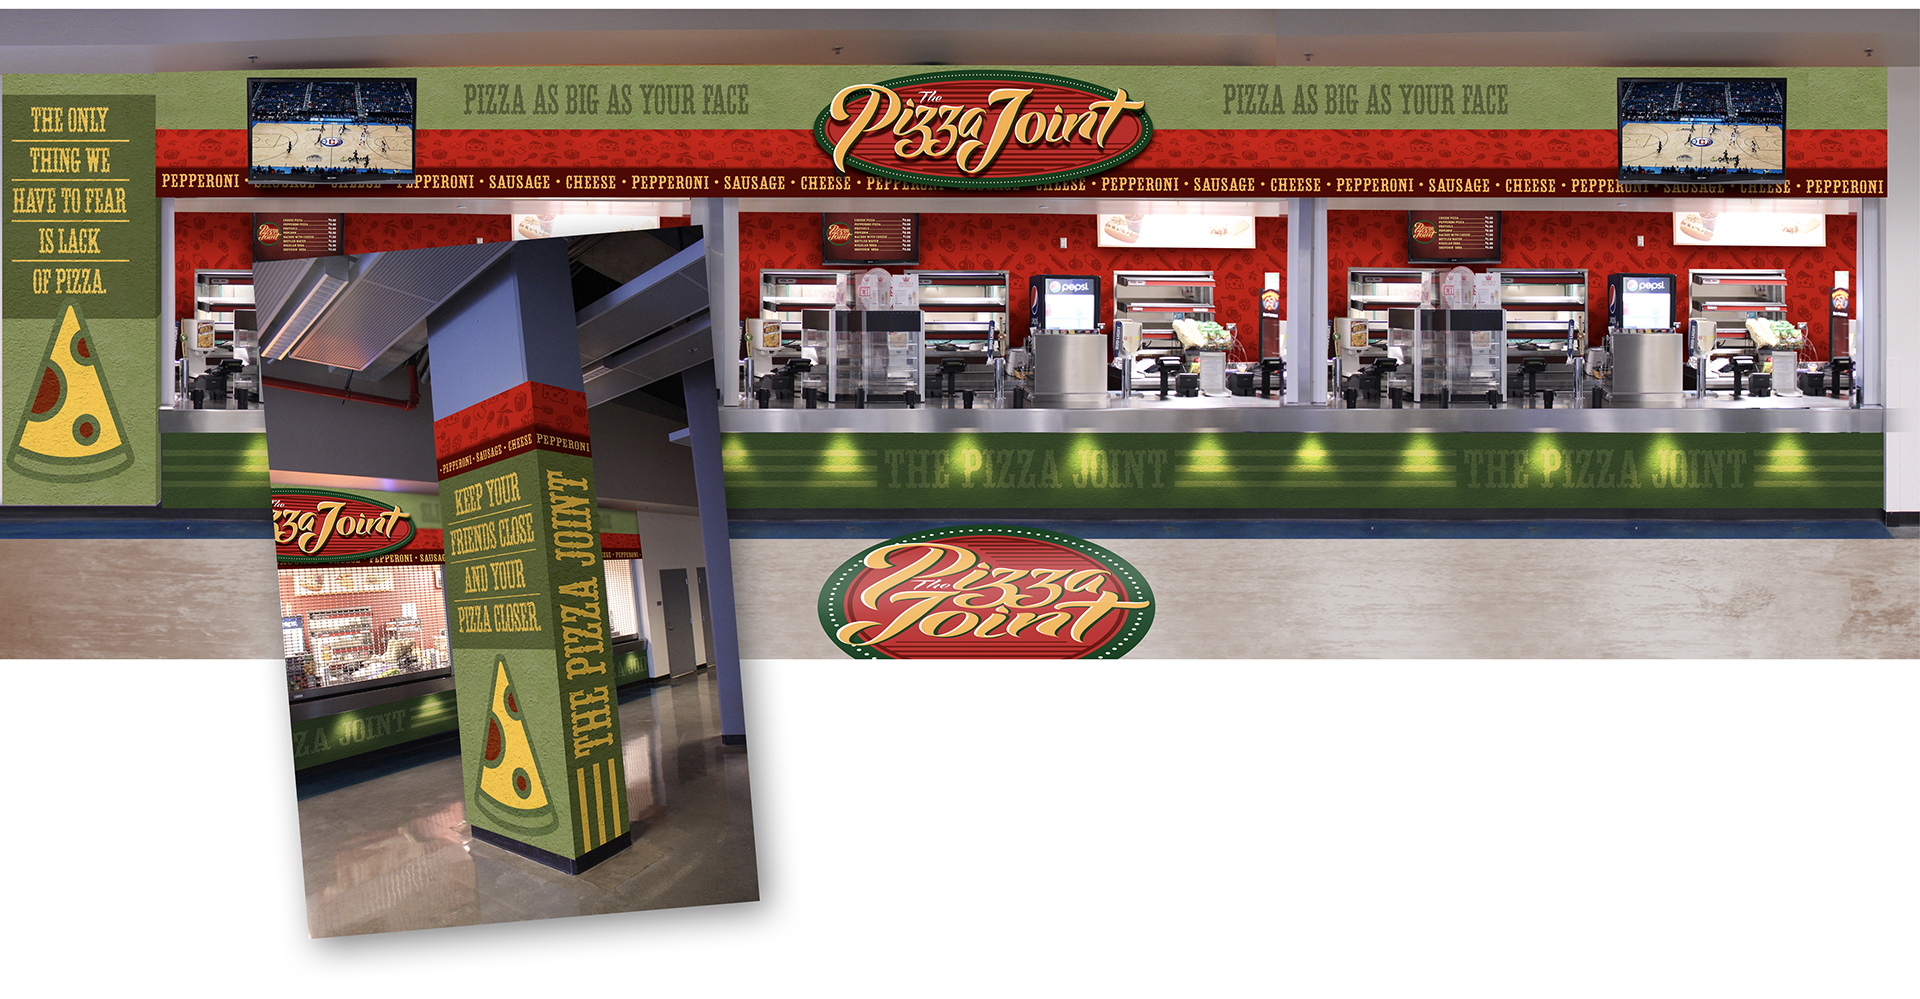 the pizza joint concession